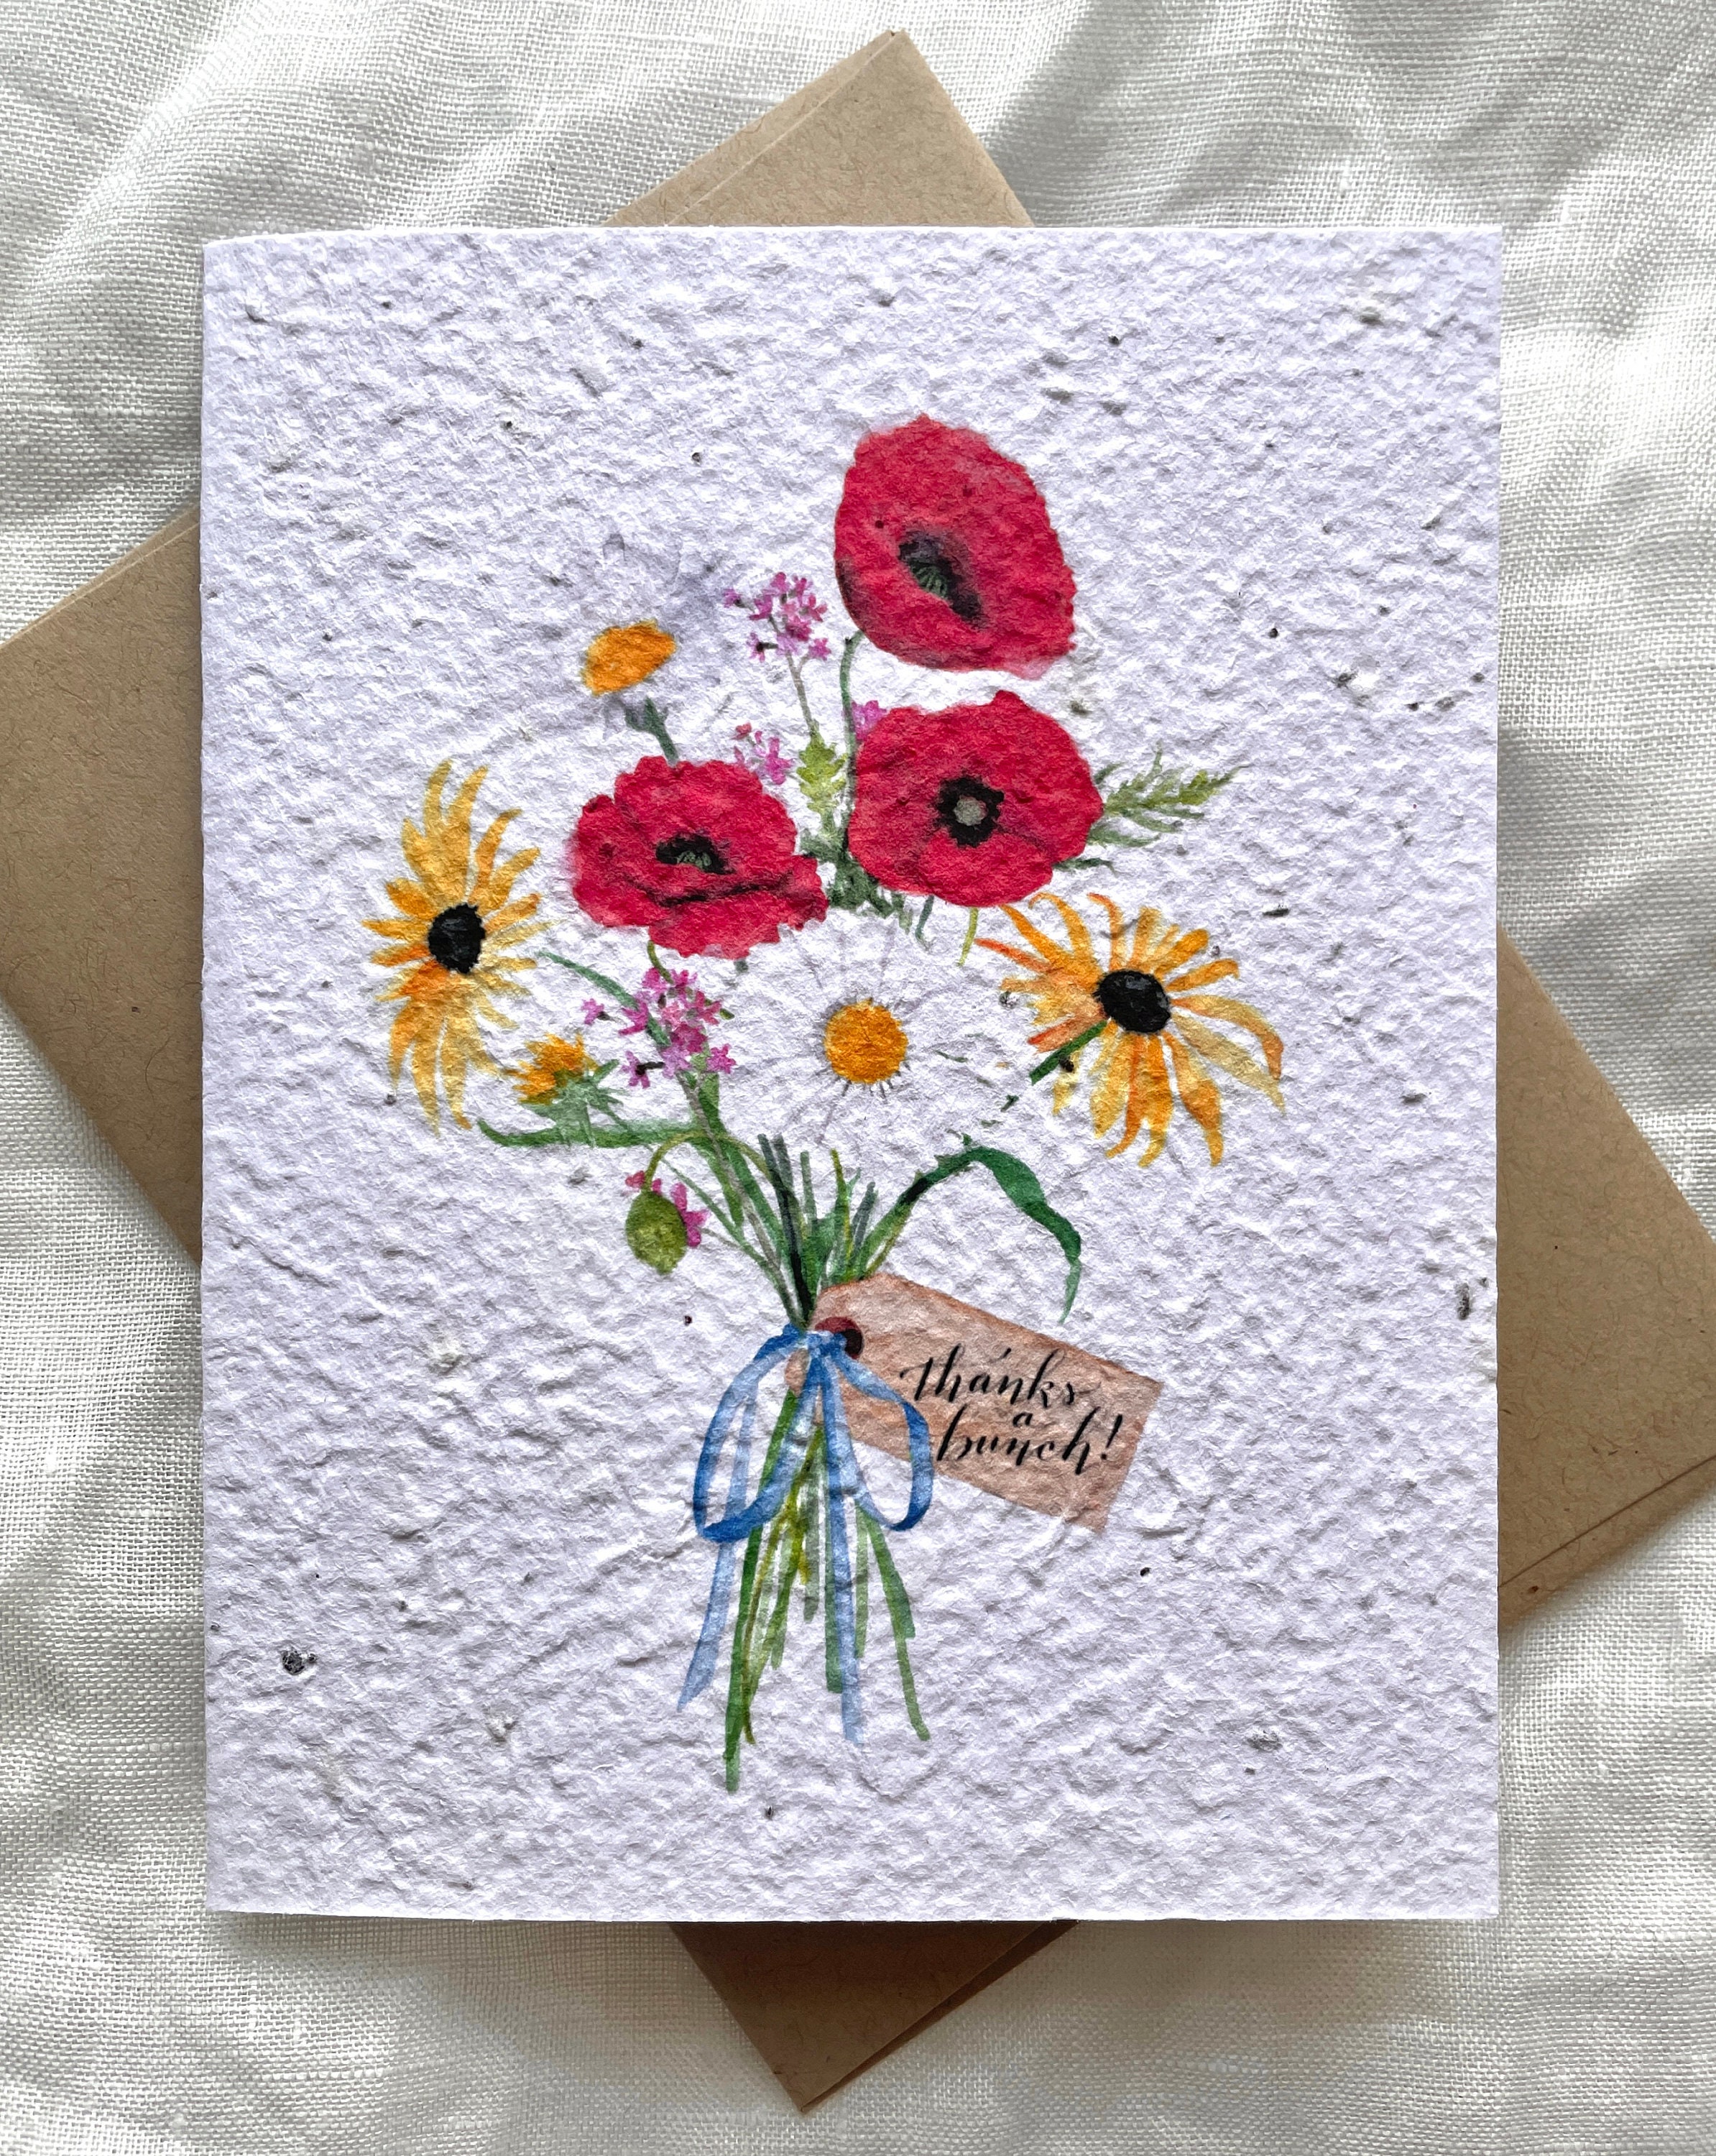 Plantable Flower Seed Paper Cards Thank You Congratulations, Friends,  Family, Greeting, Gardening, Eco-friendly, Biodegradable 